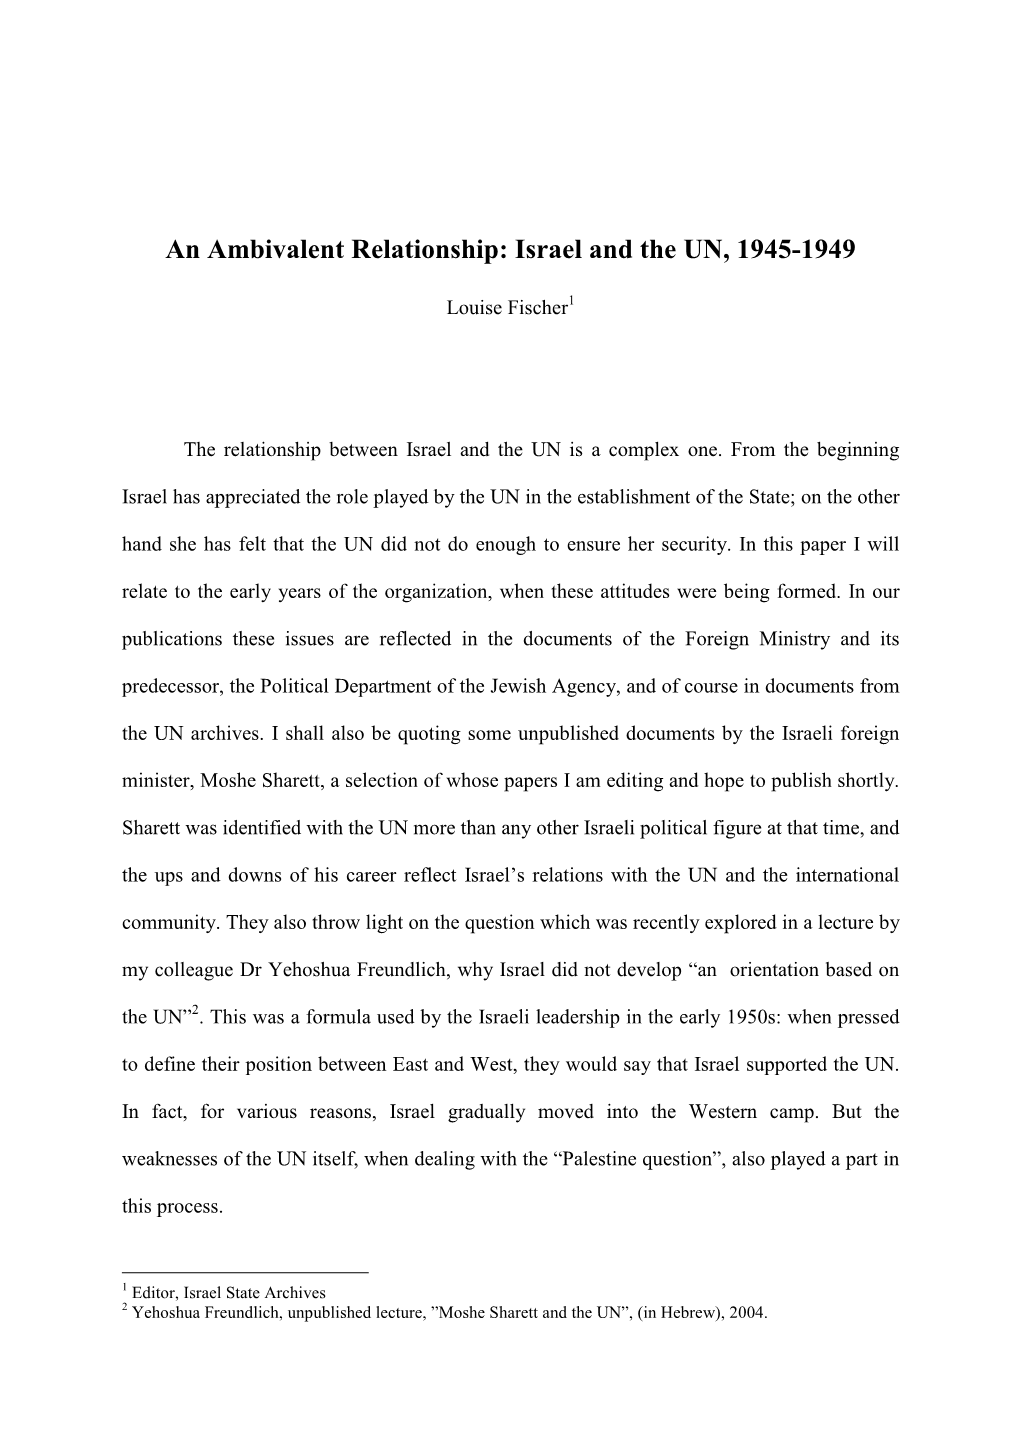 An Ambivalent Relationship: Israel and the UN, 1945-1949